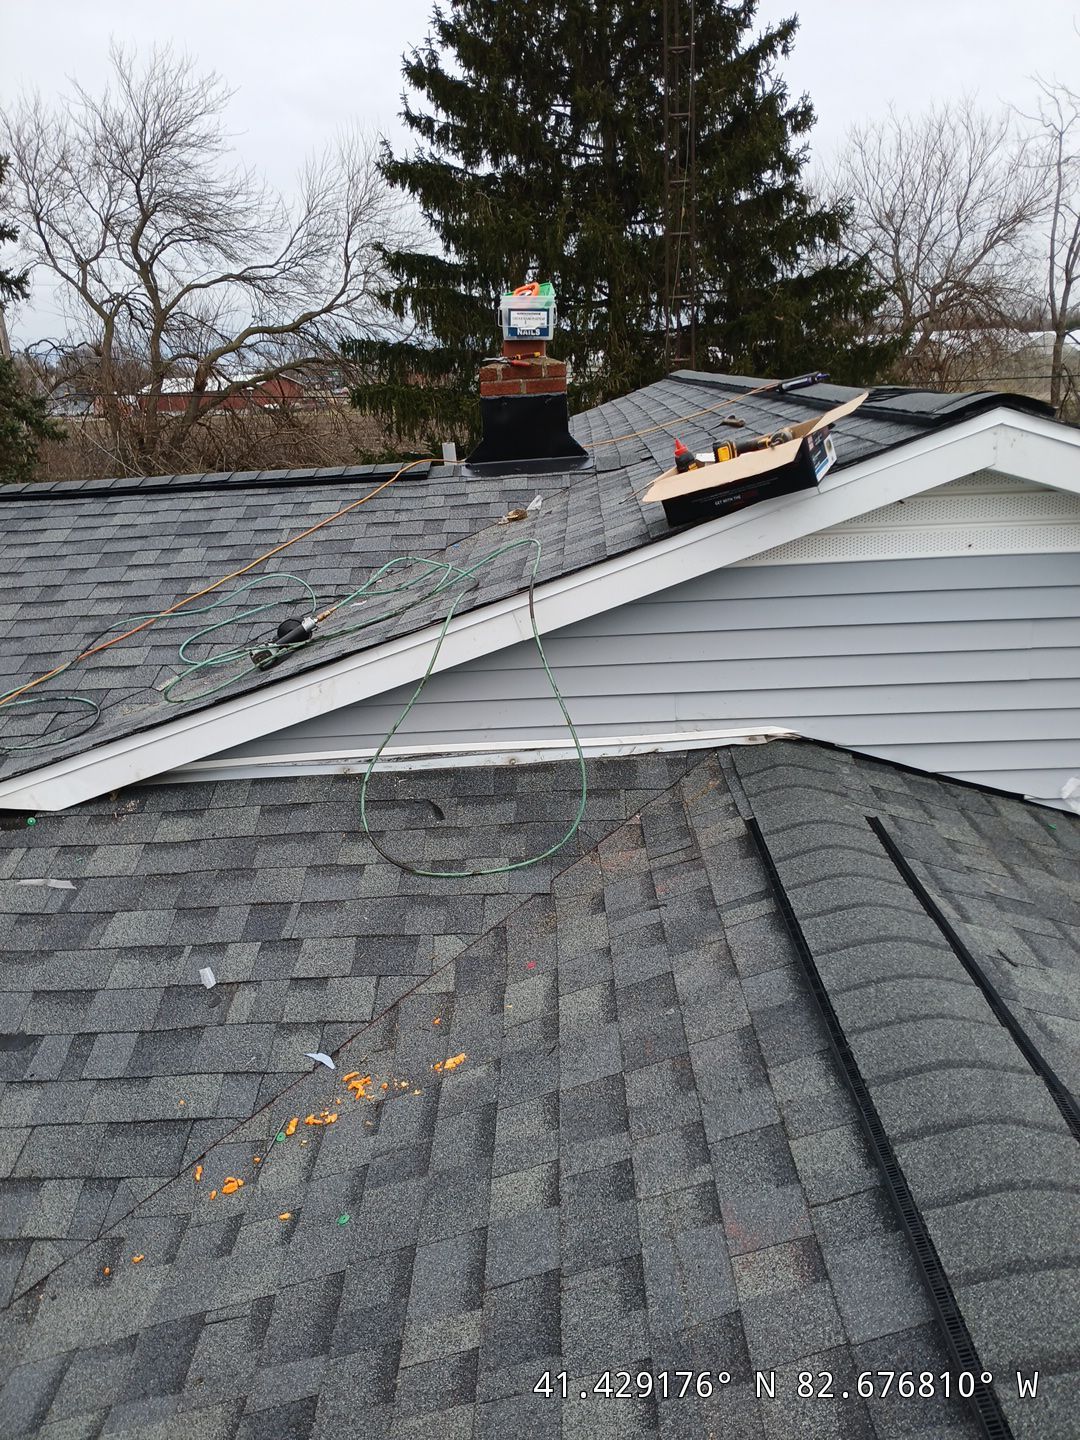 A rooftop with grey shingles features a variety of tools and materials, including wires and wooden planks, scattered around. GPS coordinates are displayed at the bottom. Surrounding area includes bare trees.